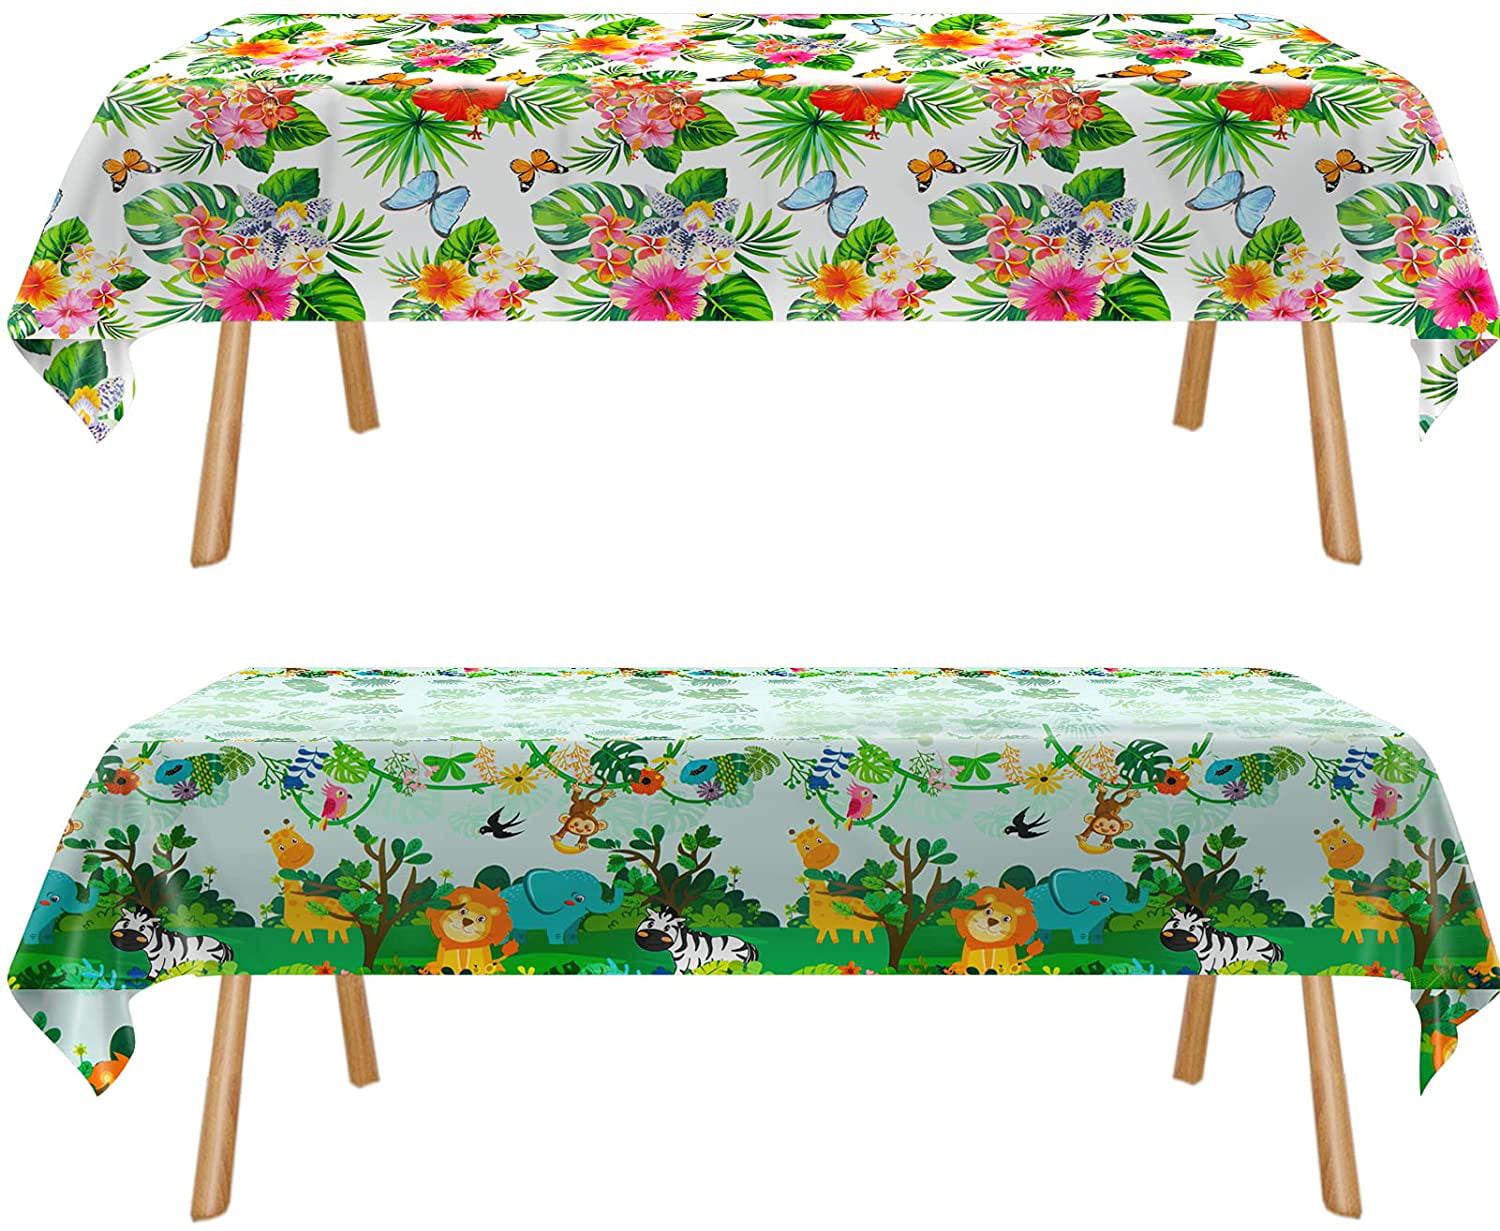 Plastic Table Covers 54 x 102 2 Pack Bright Jungle Safari Animals Party Supplies 